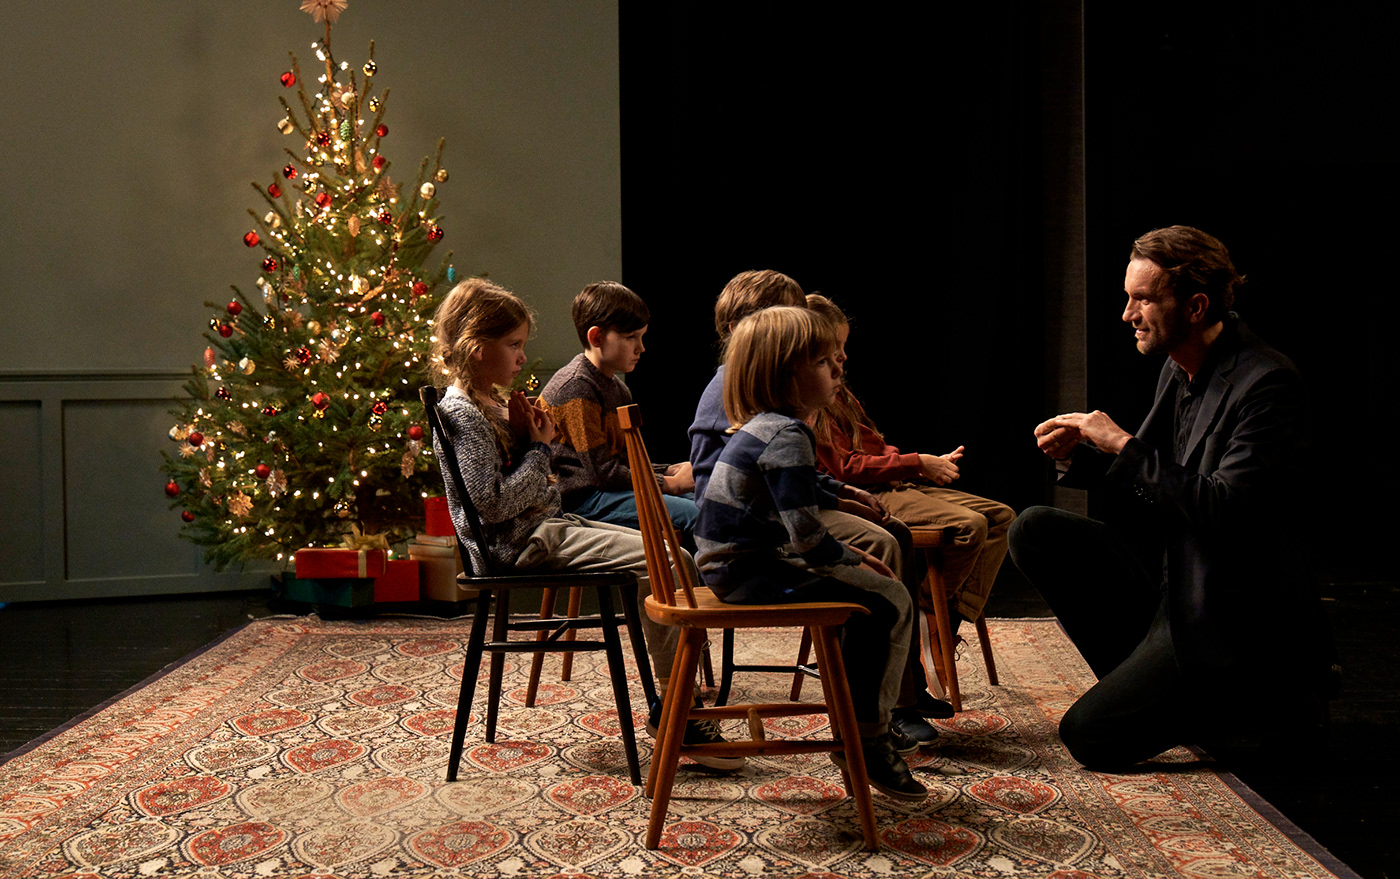 Famous Polish actor, Tomasz Kot, teaching kids how to lie about a 'Merry Christmas'